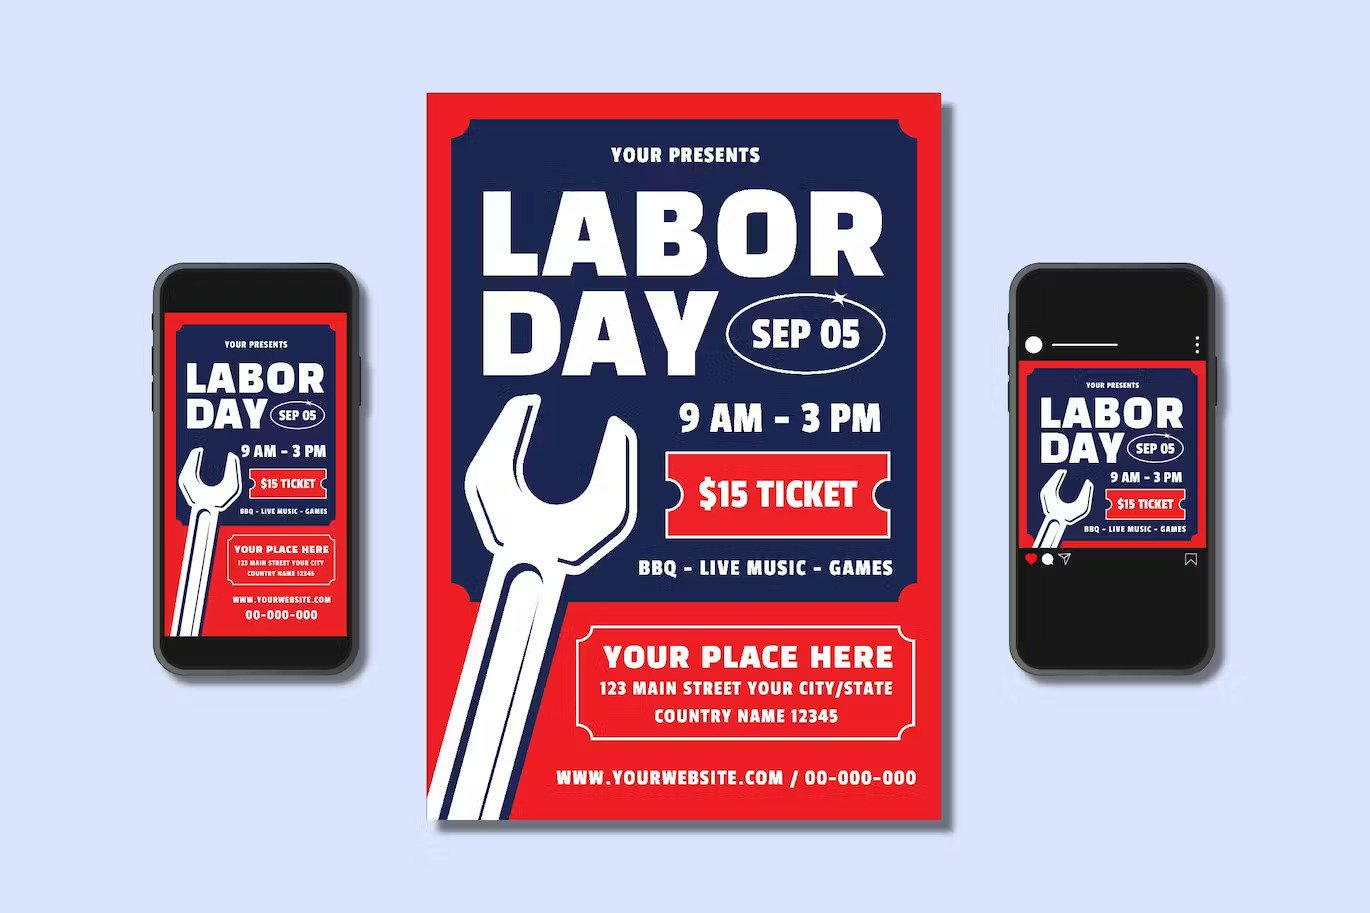 A labor day flyer set